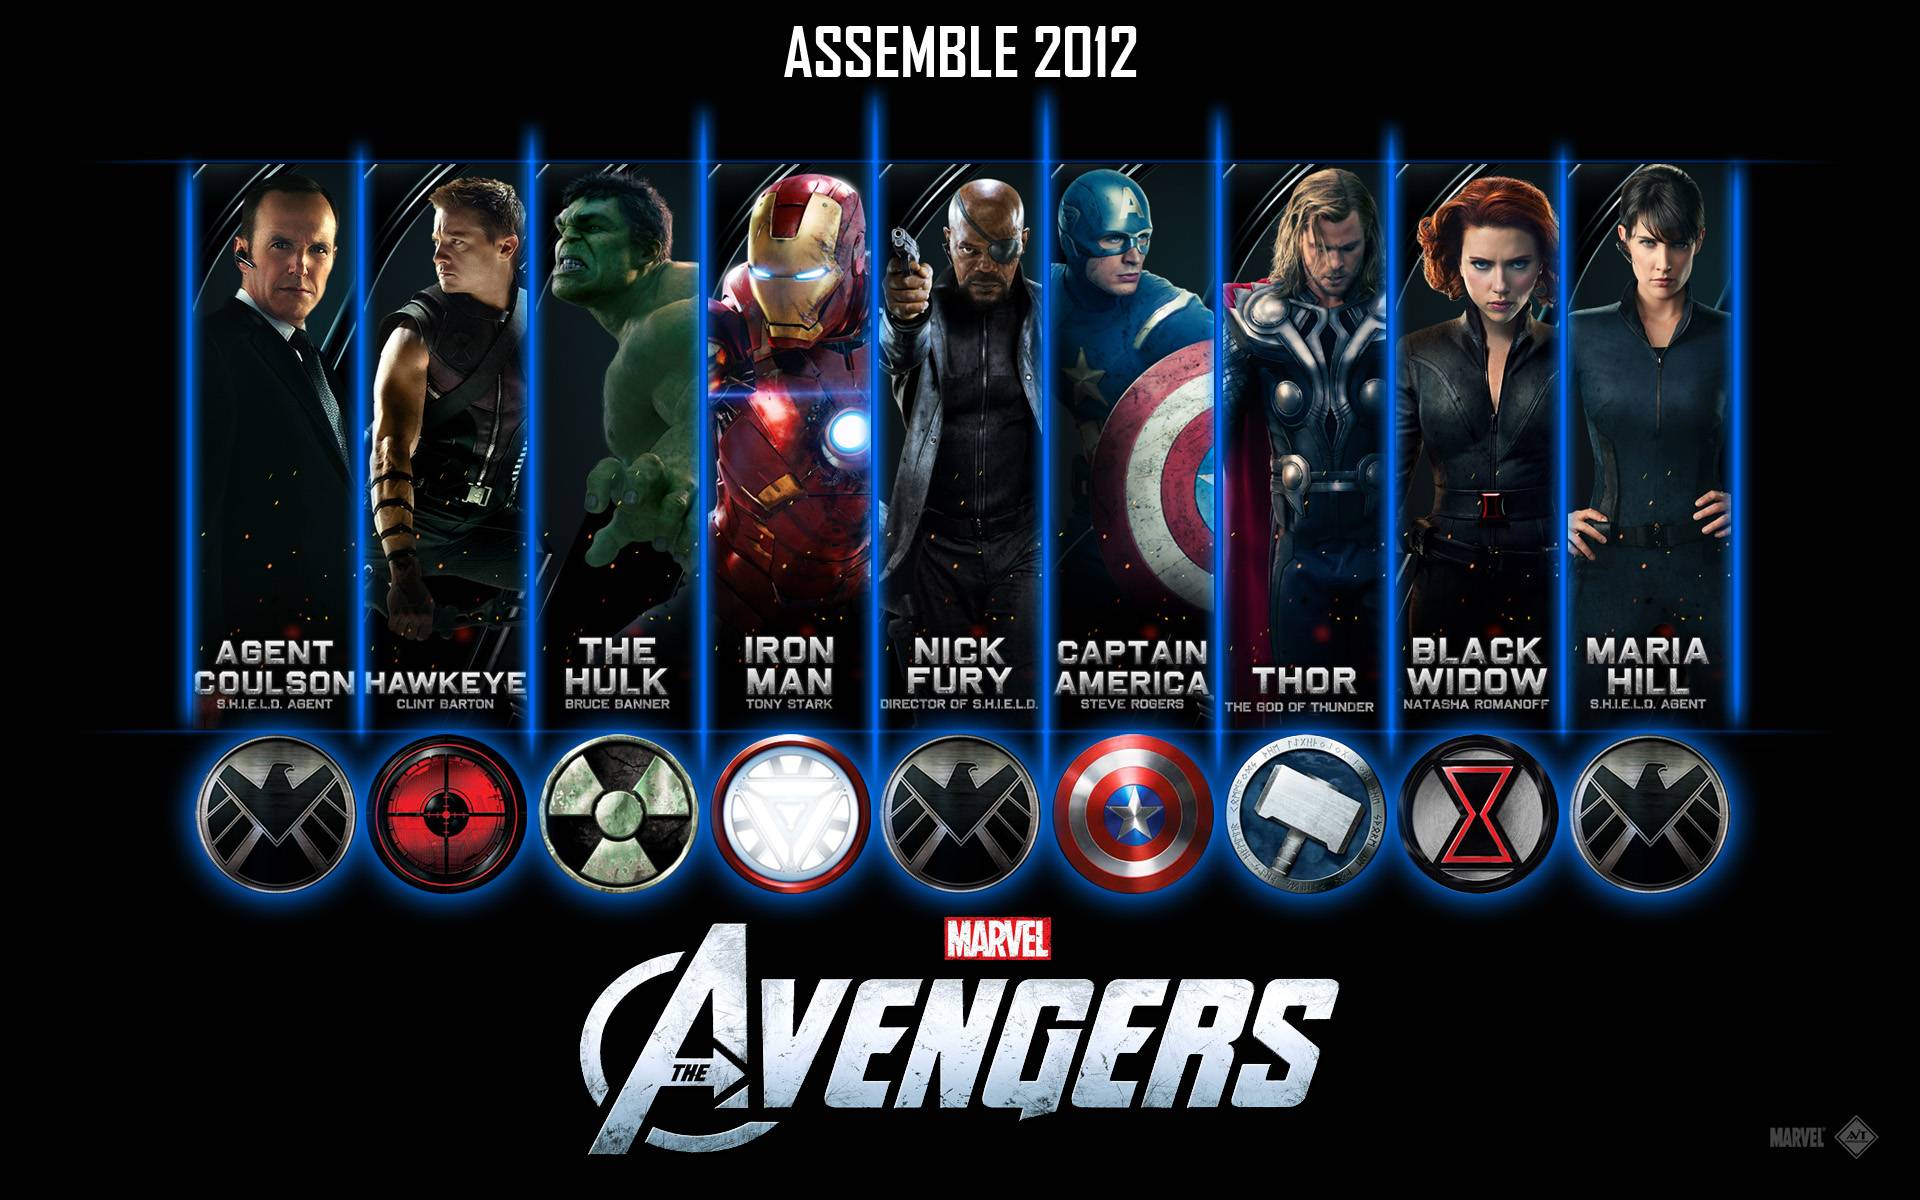 Young Avengers Wallpaper. The Avengers Wallpaper, Avengers Movie Wallpaper and Avengers Cartoon Wallpaper